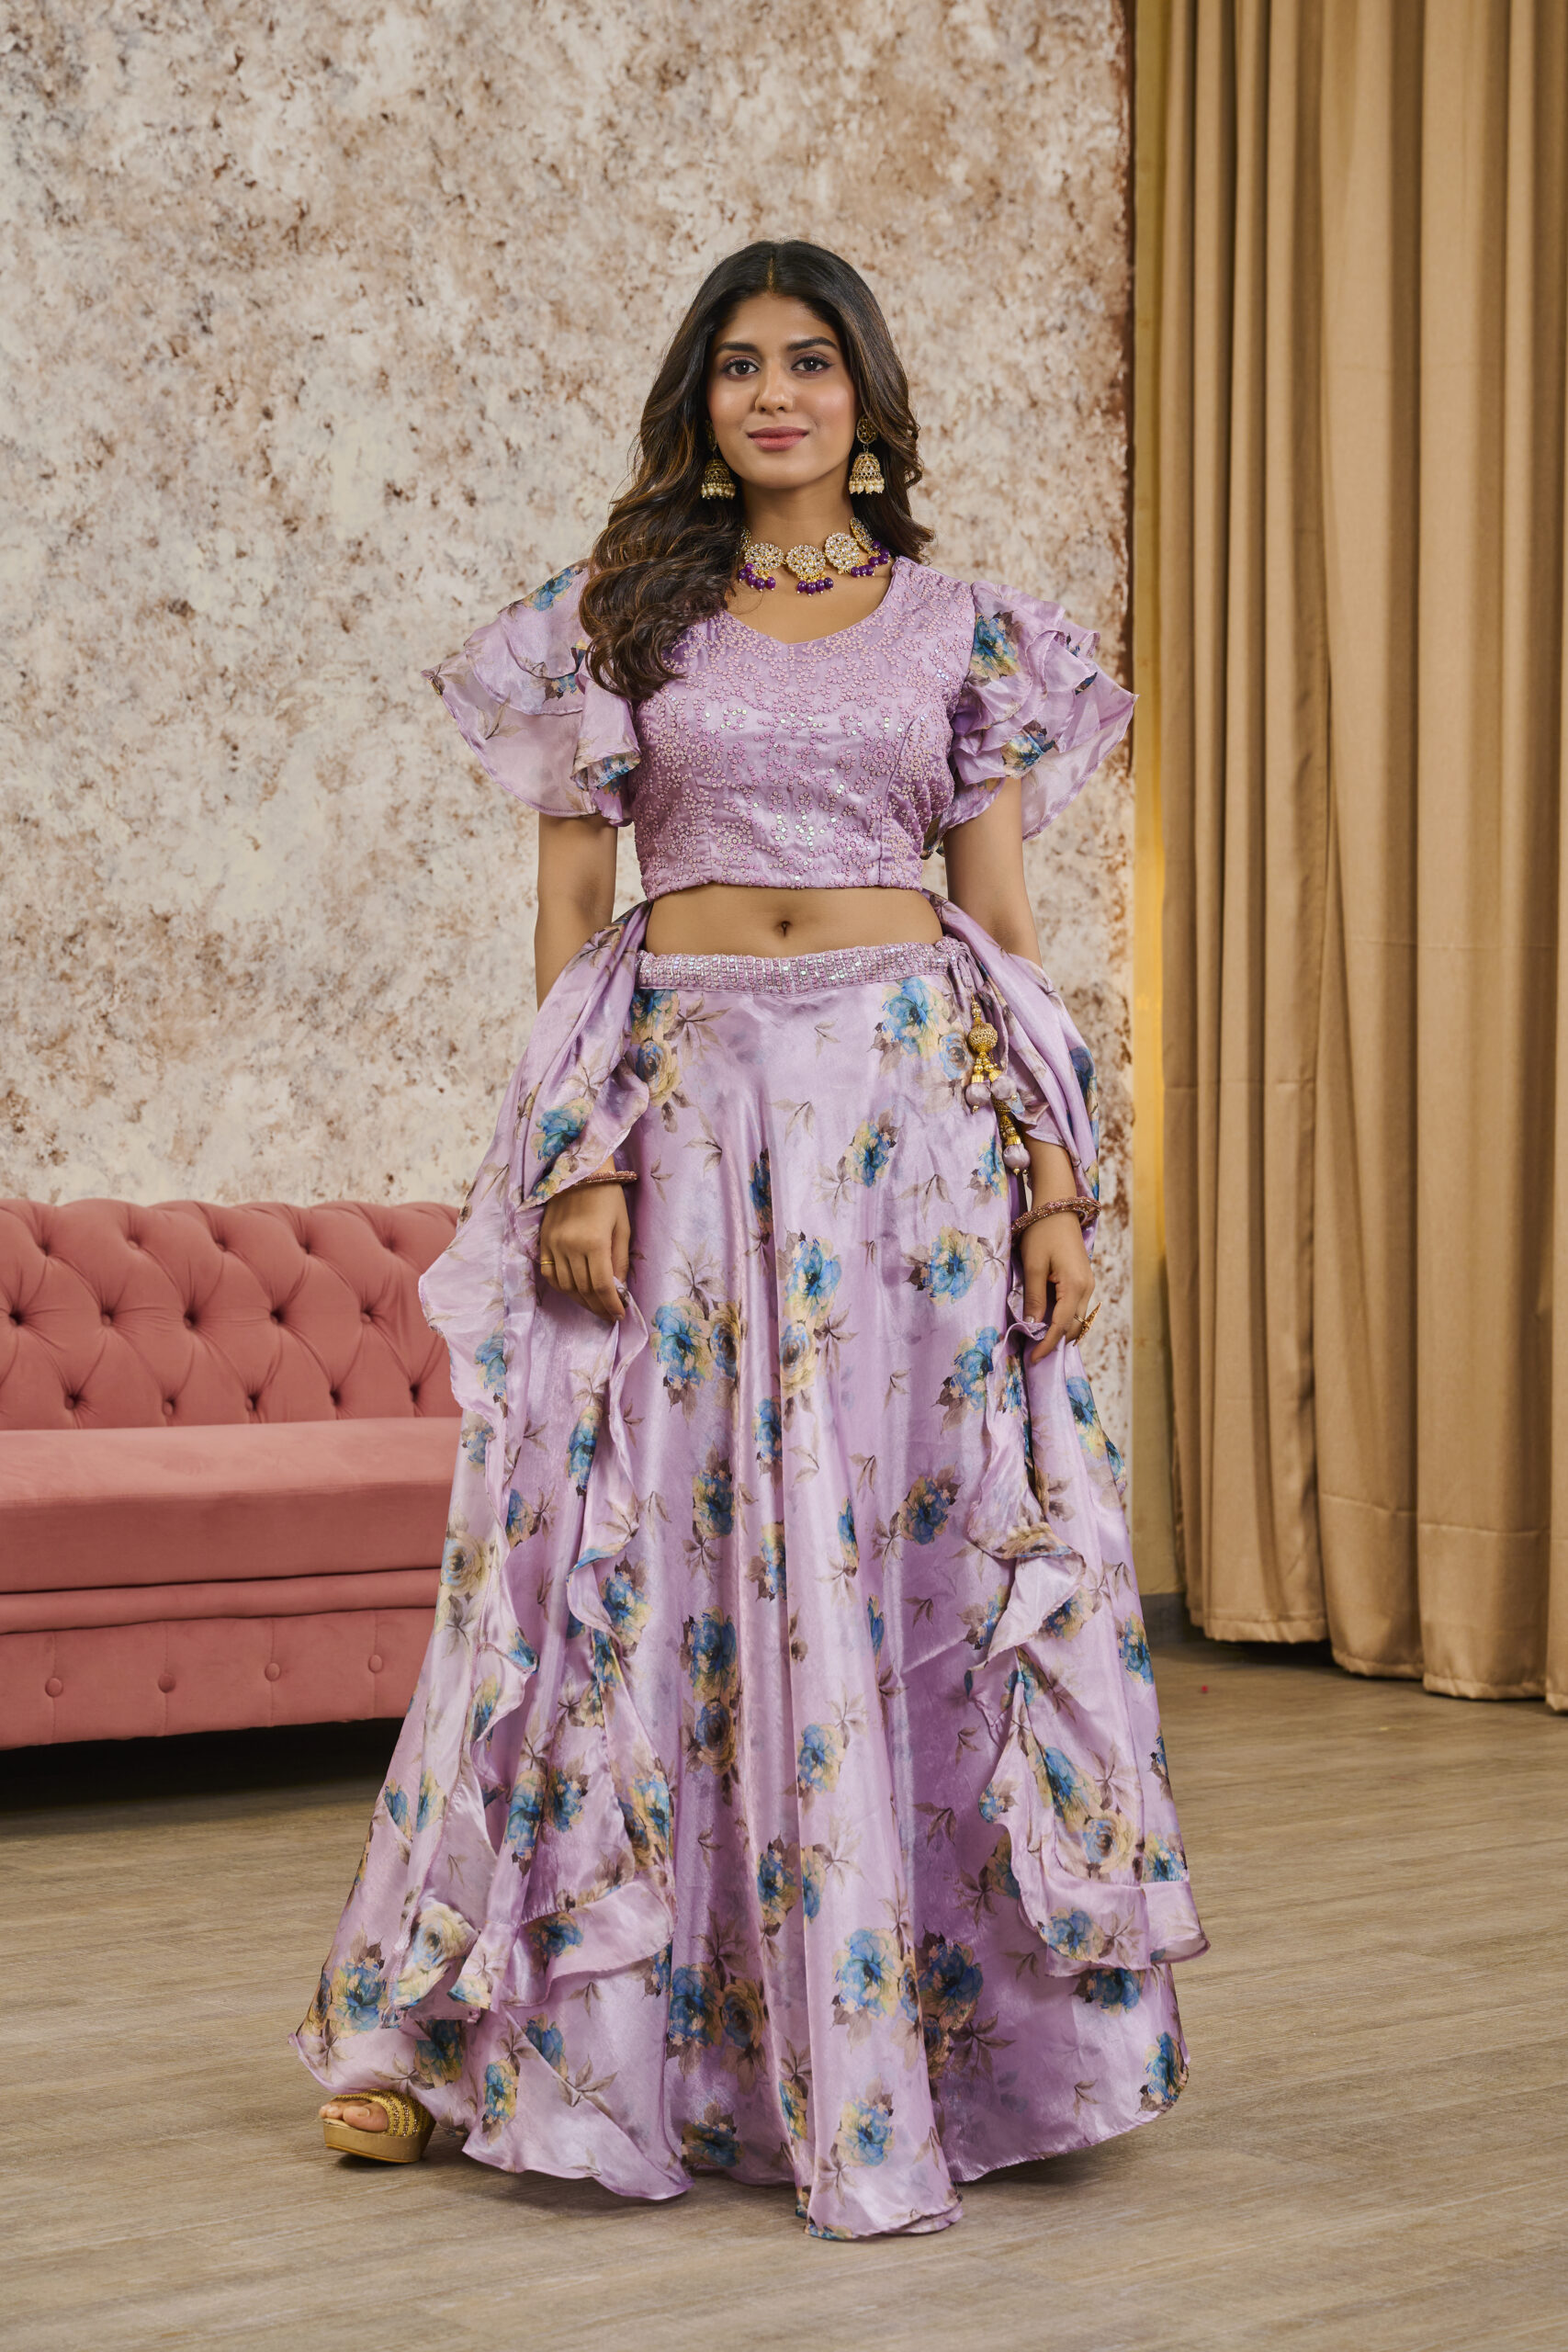 Lehenga Care Tips and Store after a Wedding